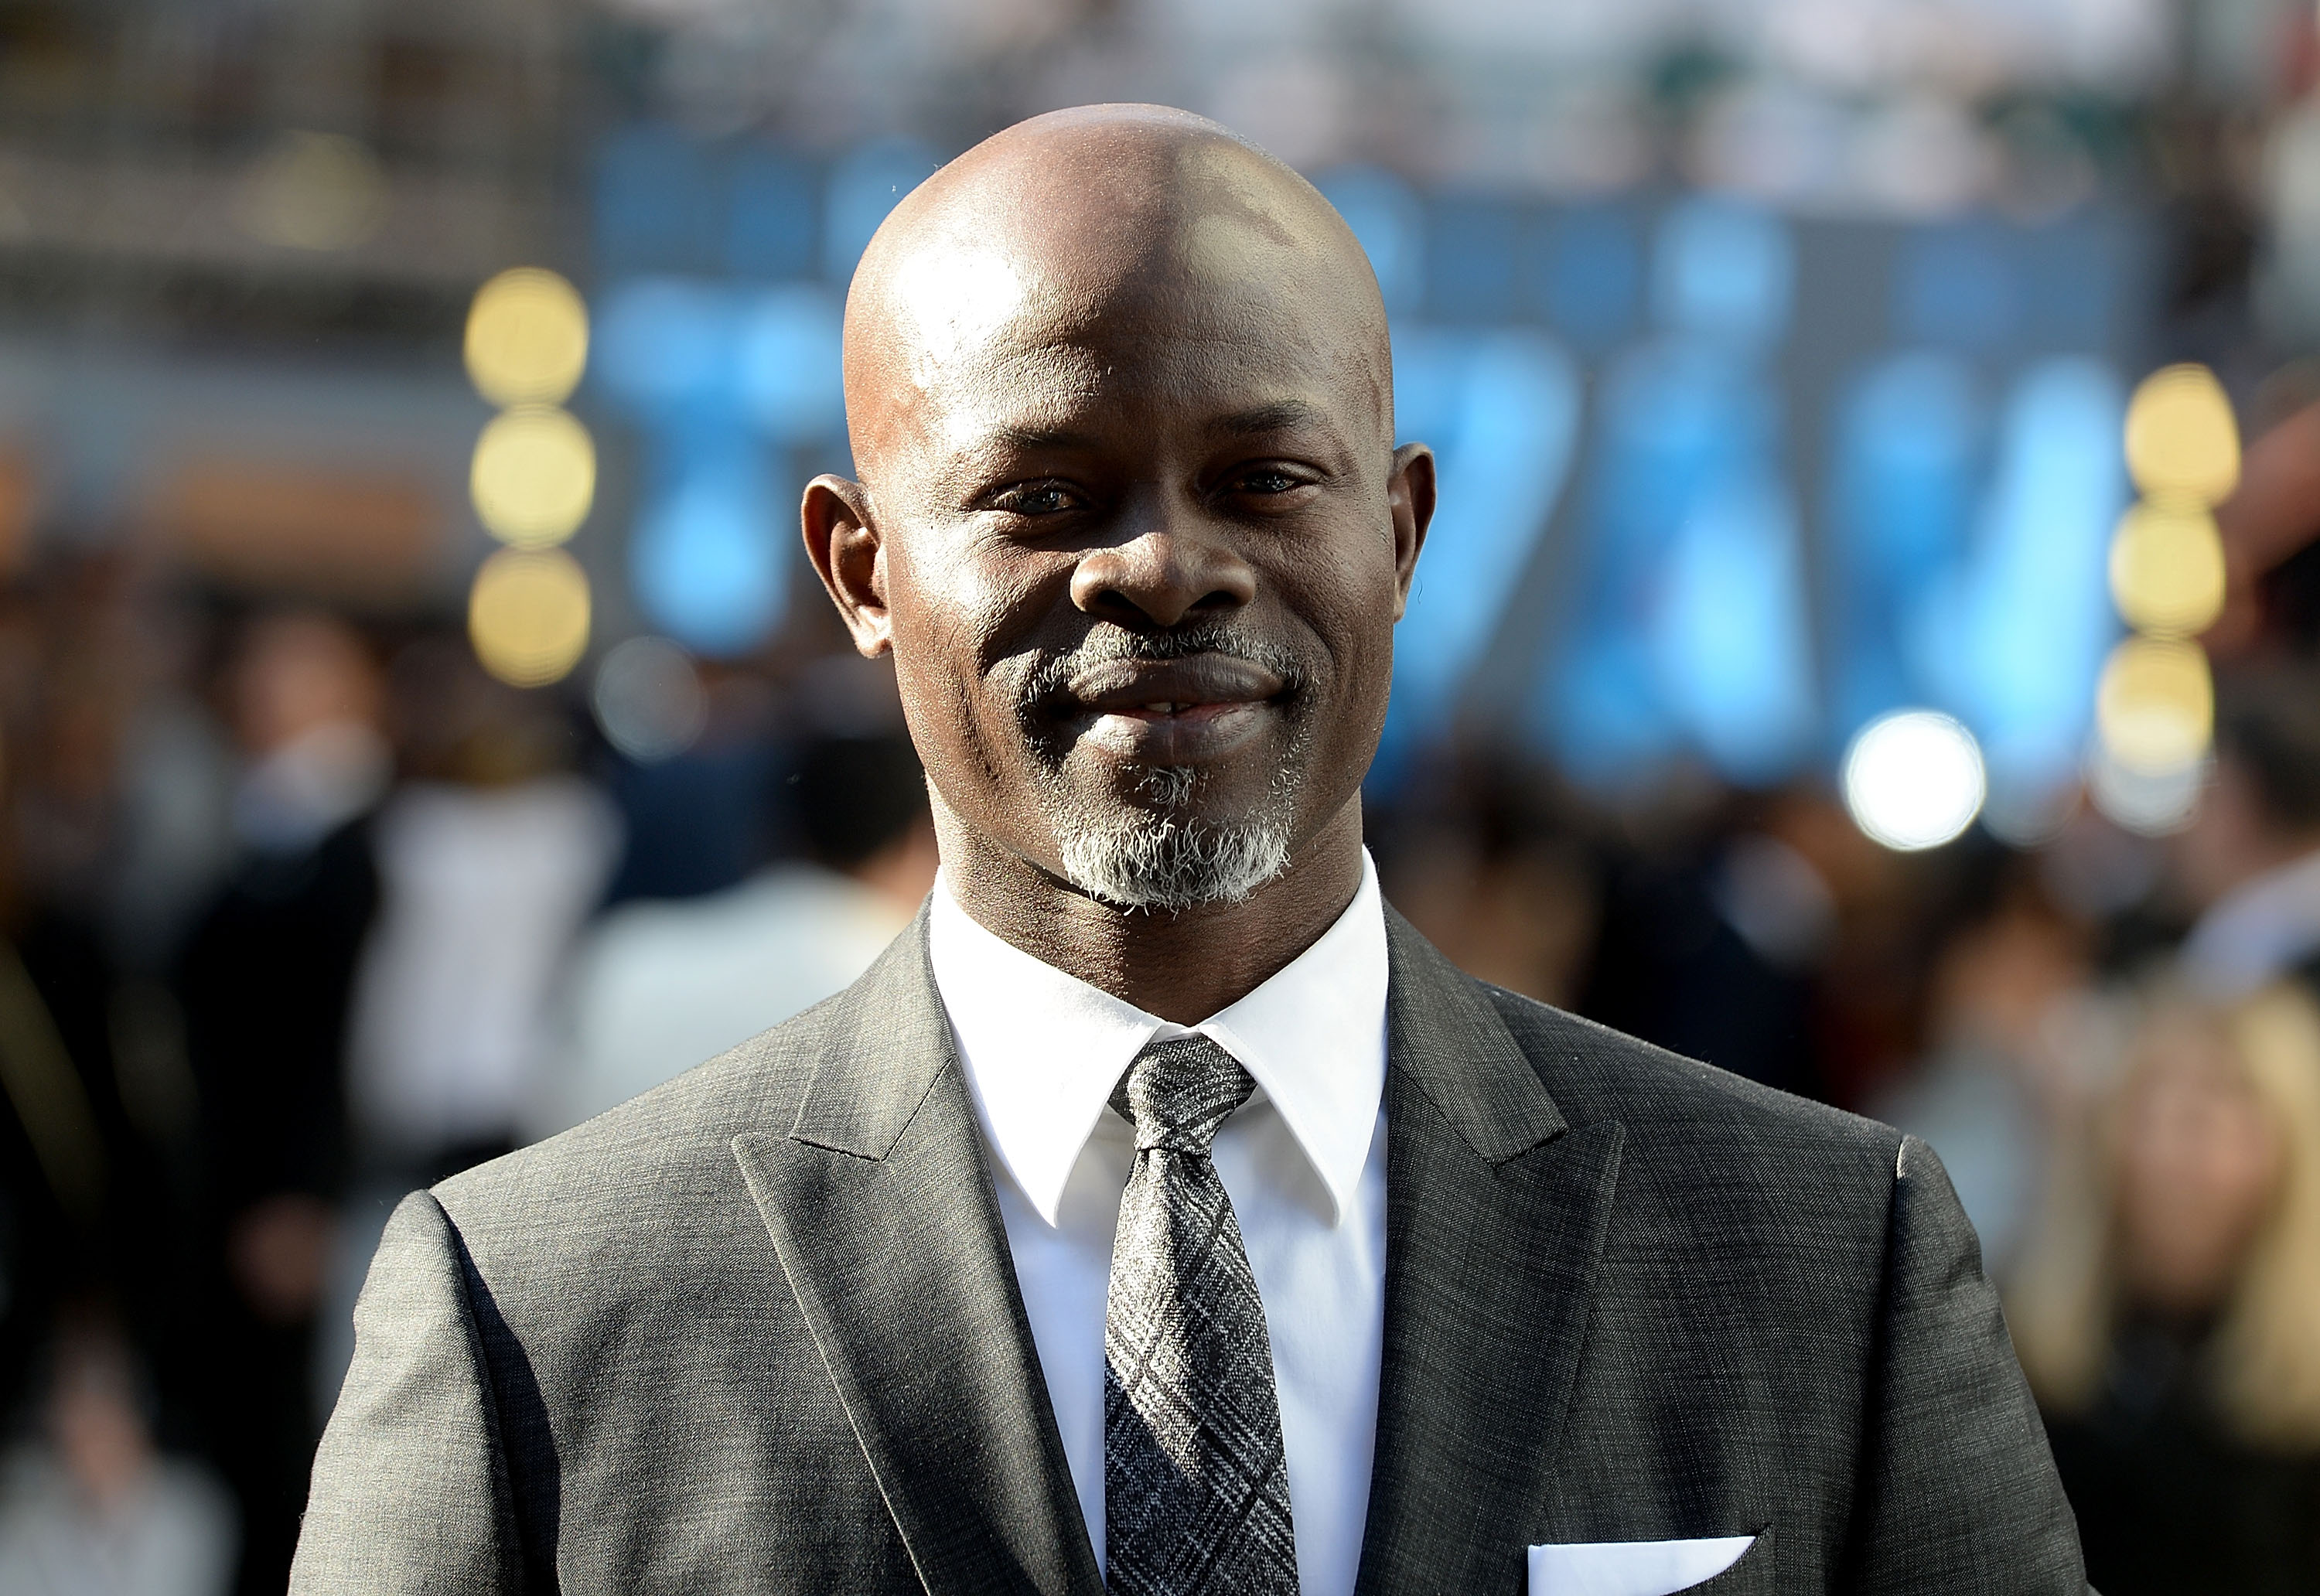 Djimon Hounsou attends the European premiere of "The Legend Of Tarzan" at Odeon Leicester Square in London on July 5, 2016. (Dave J Hogan—Dave Hogan/Getty Images)